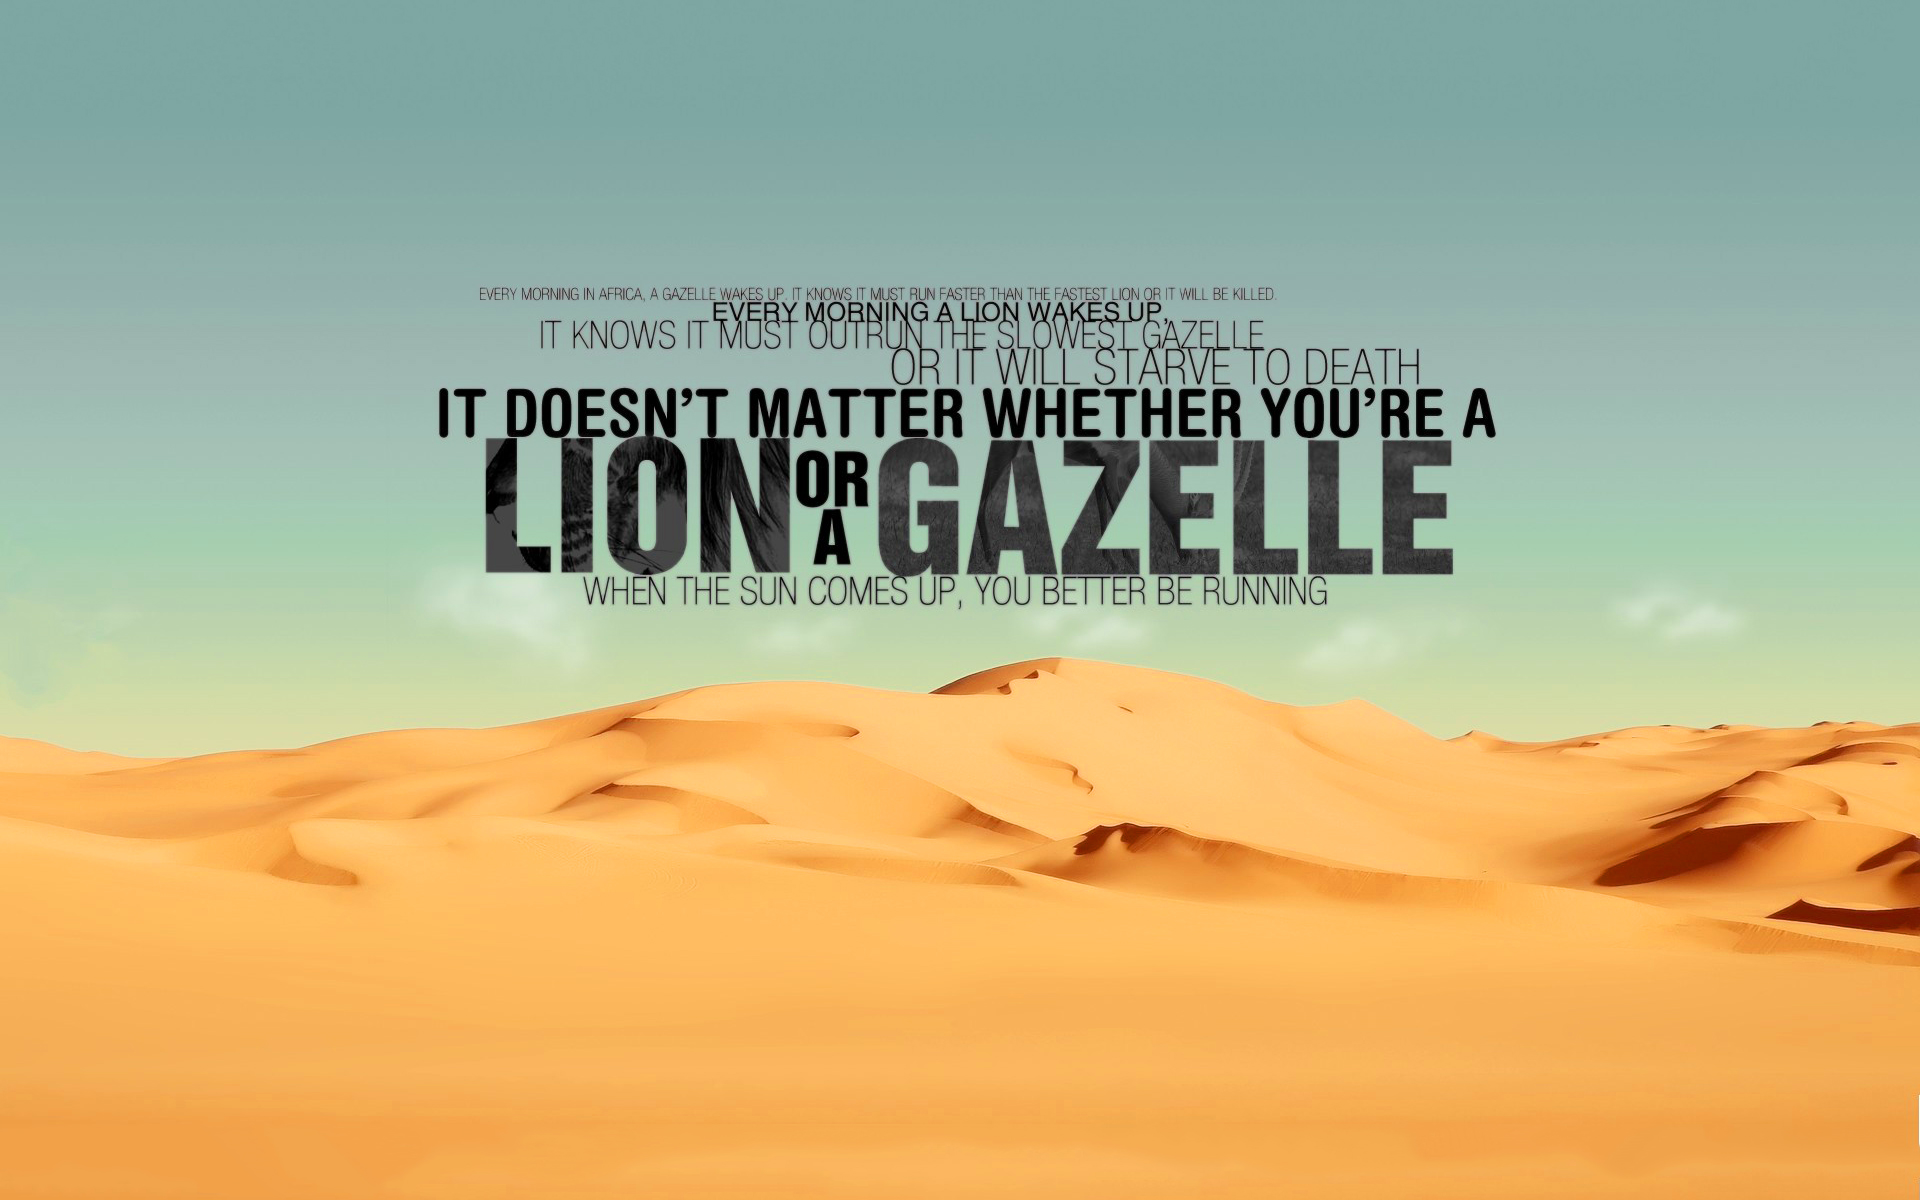 Are you lion or gazelle